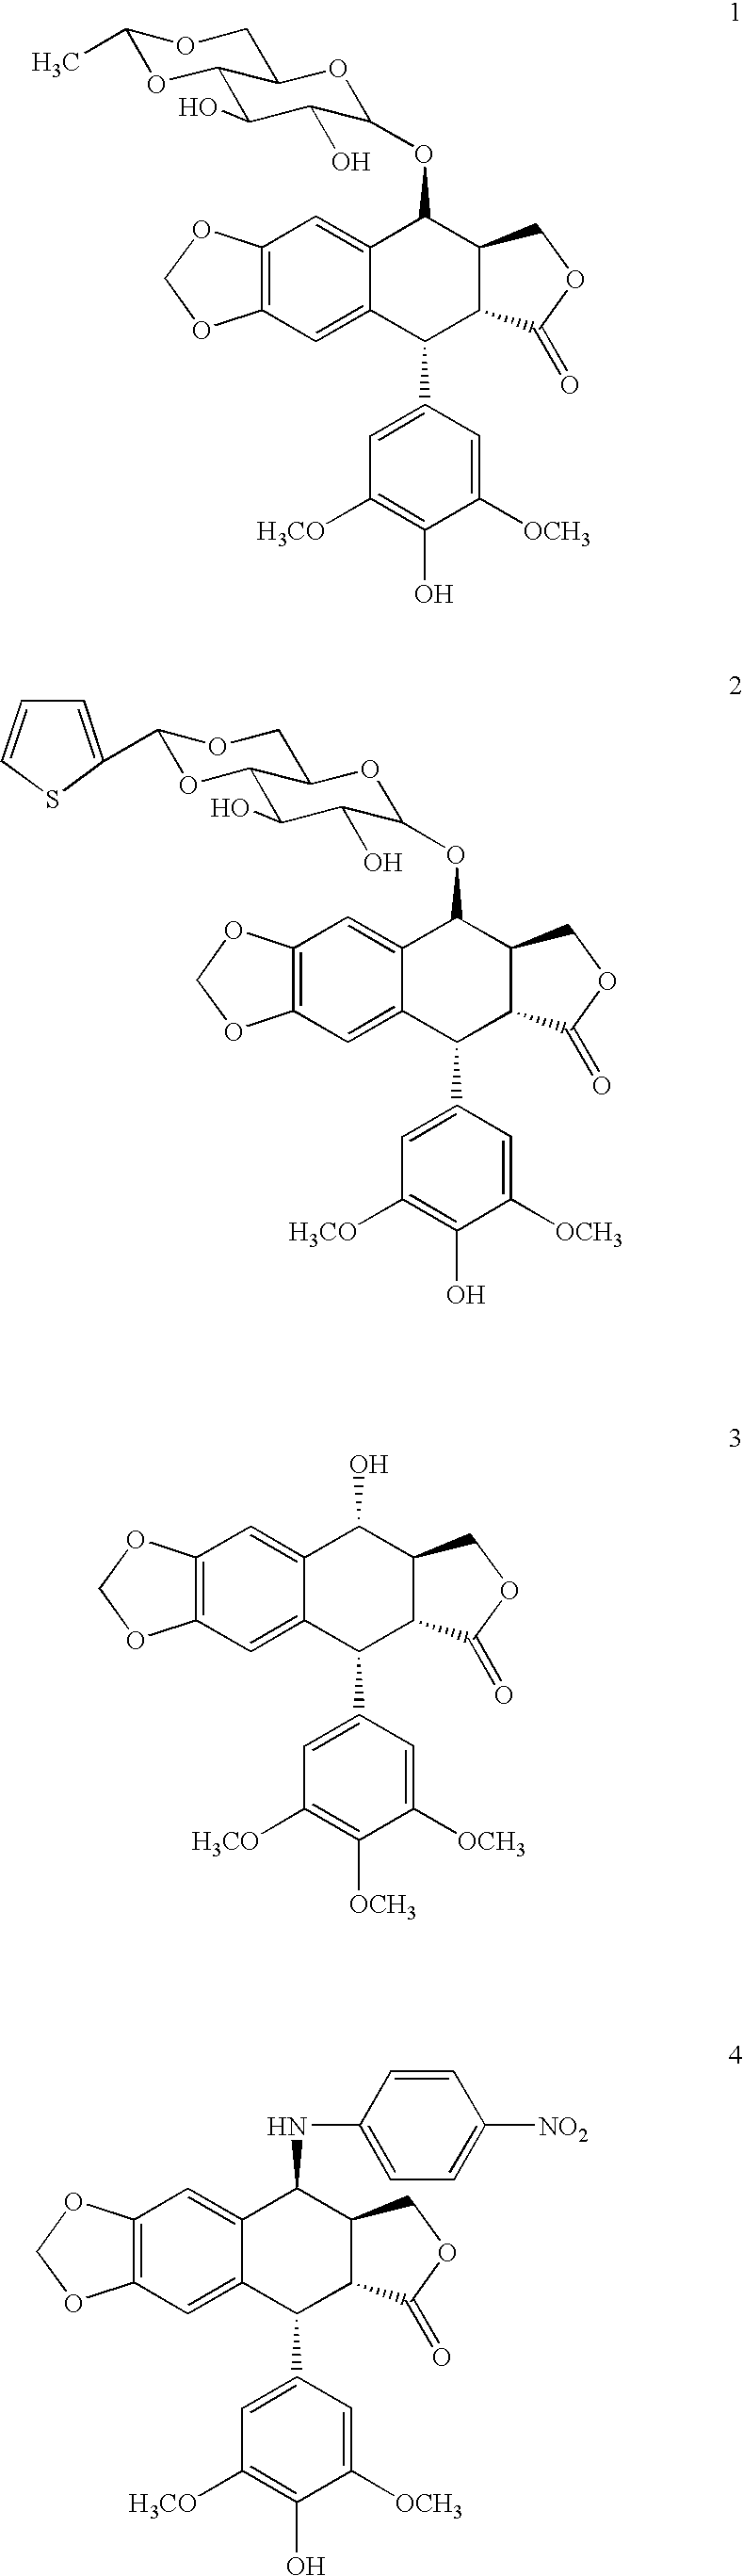 Water-soluble etoposide analogs and methods of use thereof